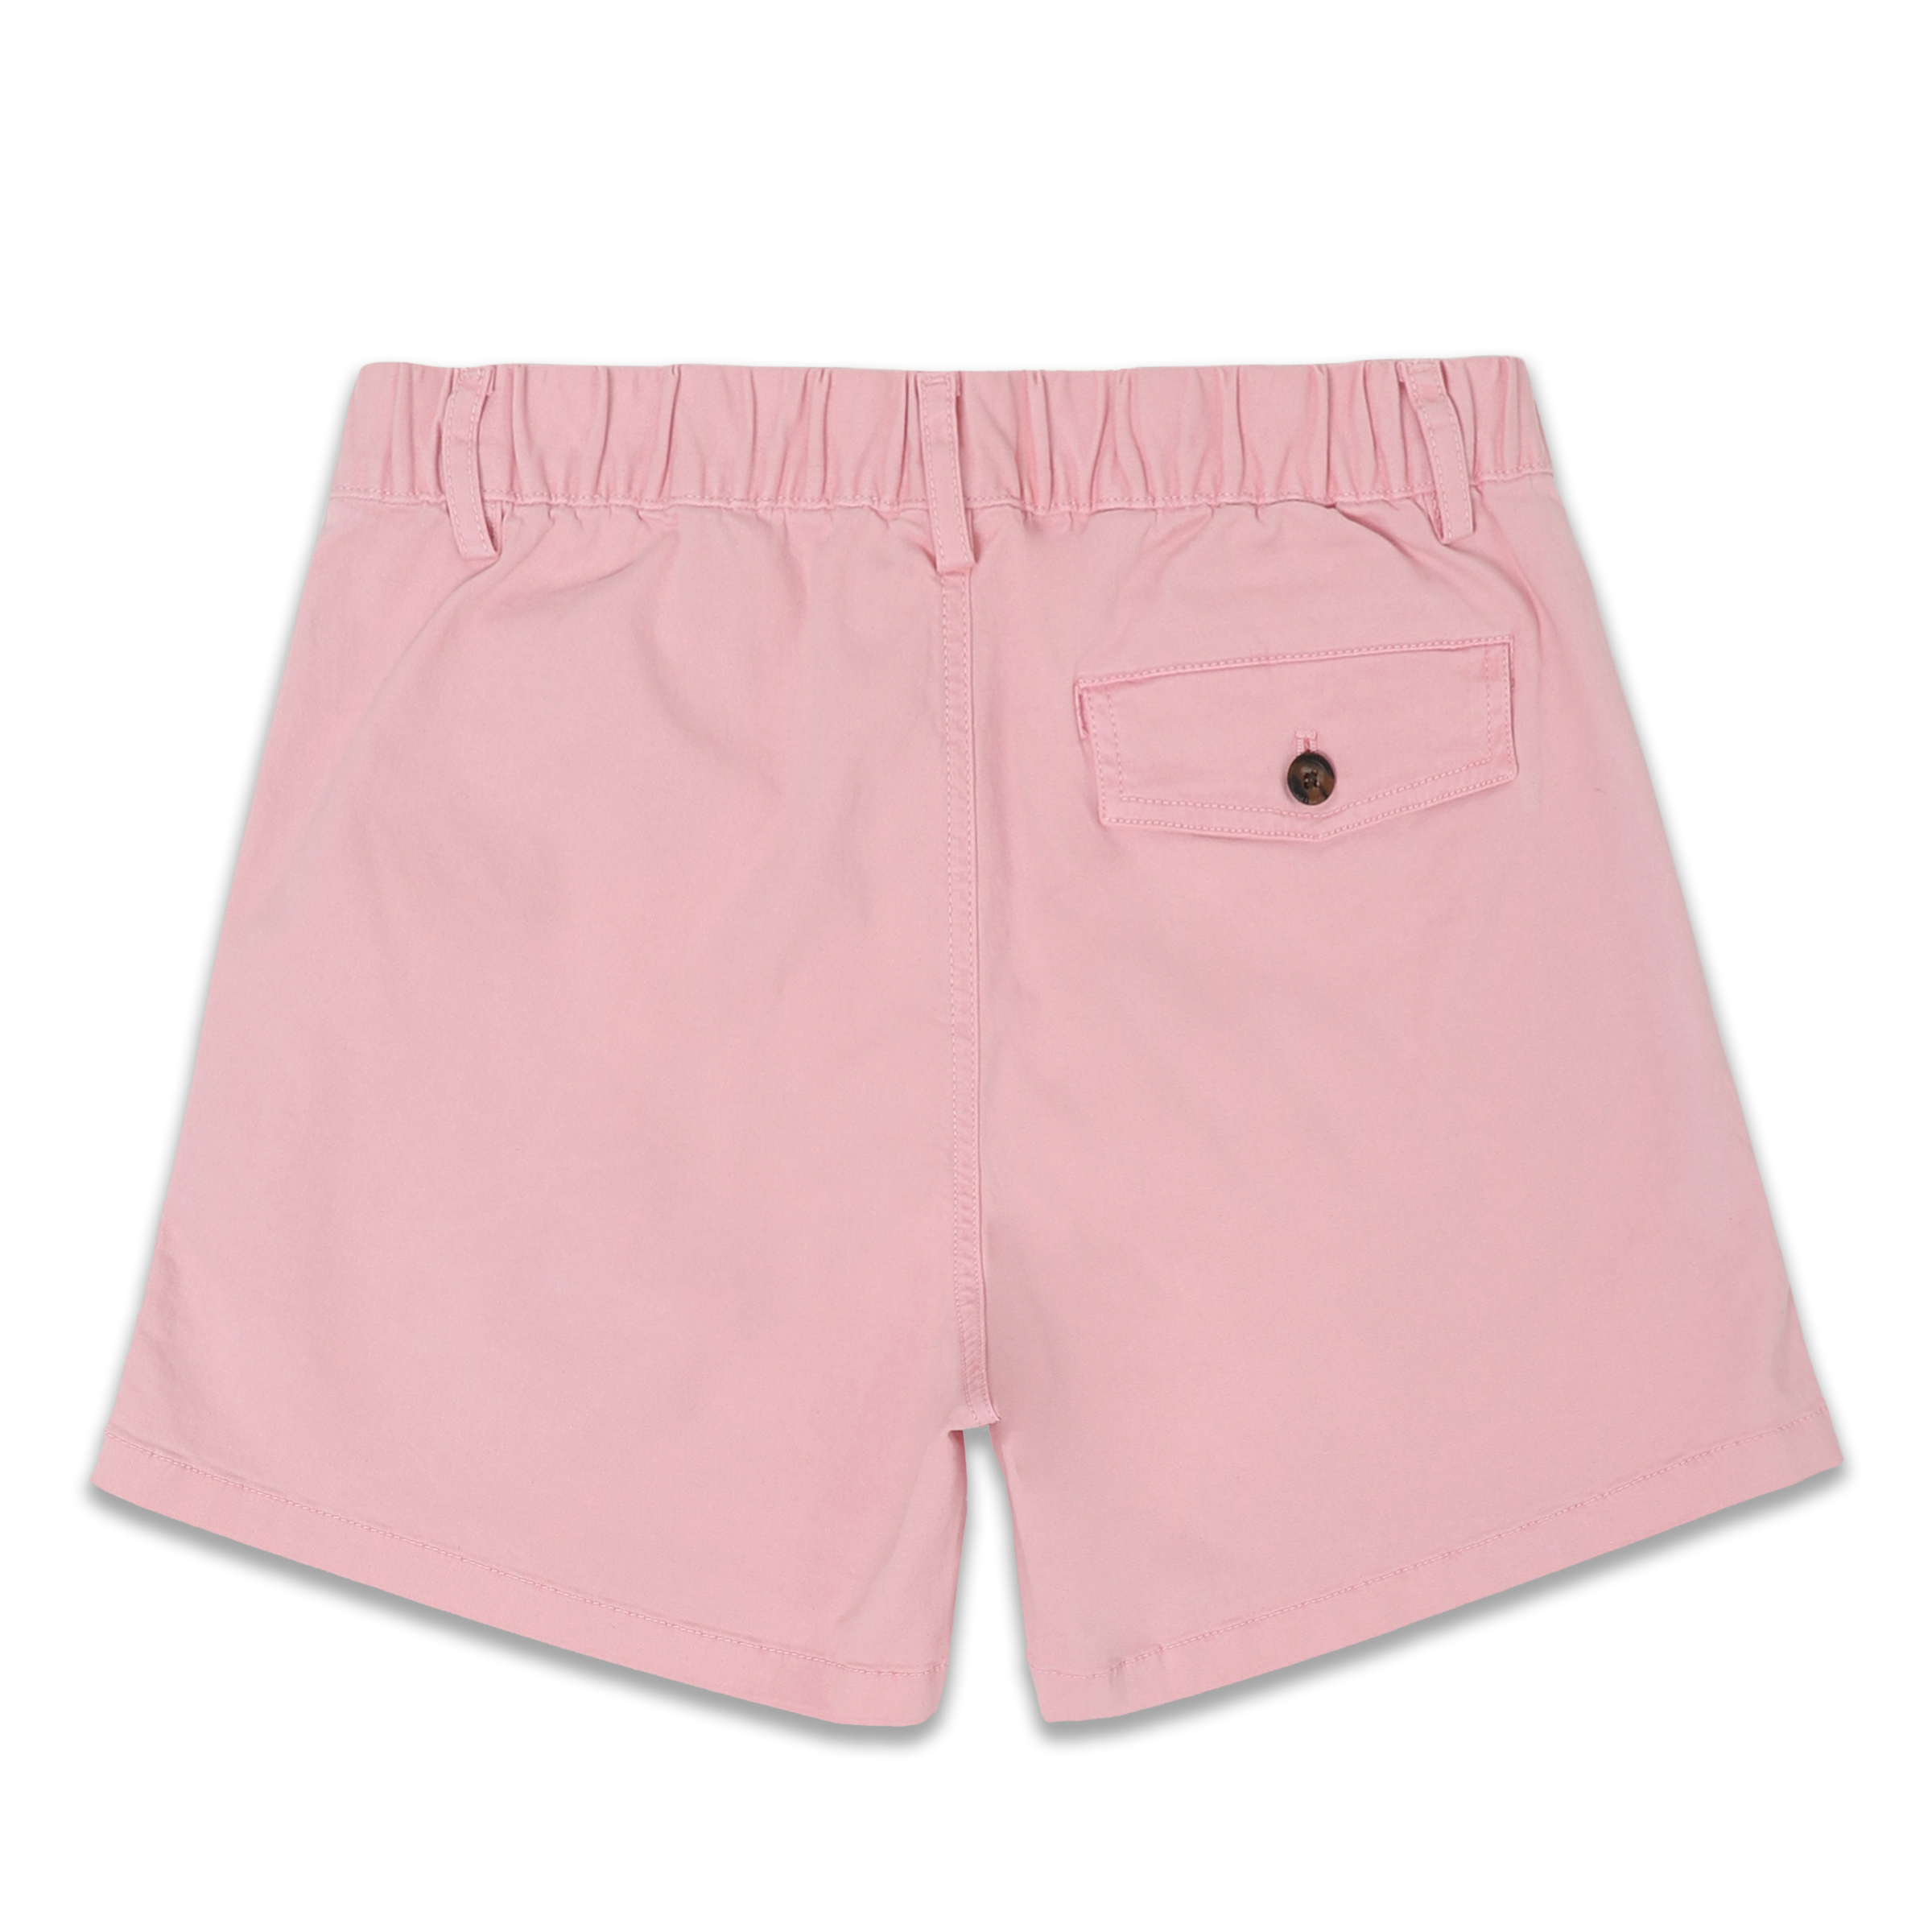 Stretch Short 5.5" Pink back with elastic waistband, belt loops, and right buttoned back pocket